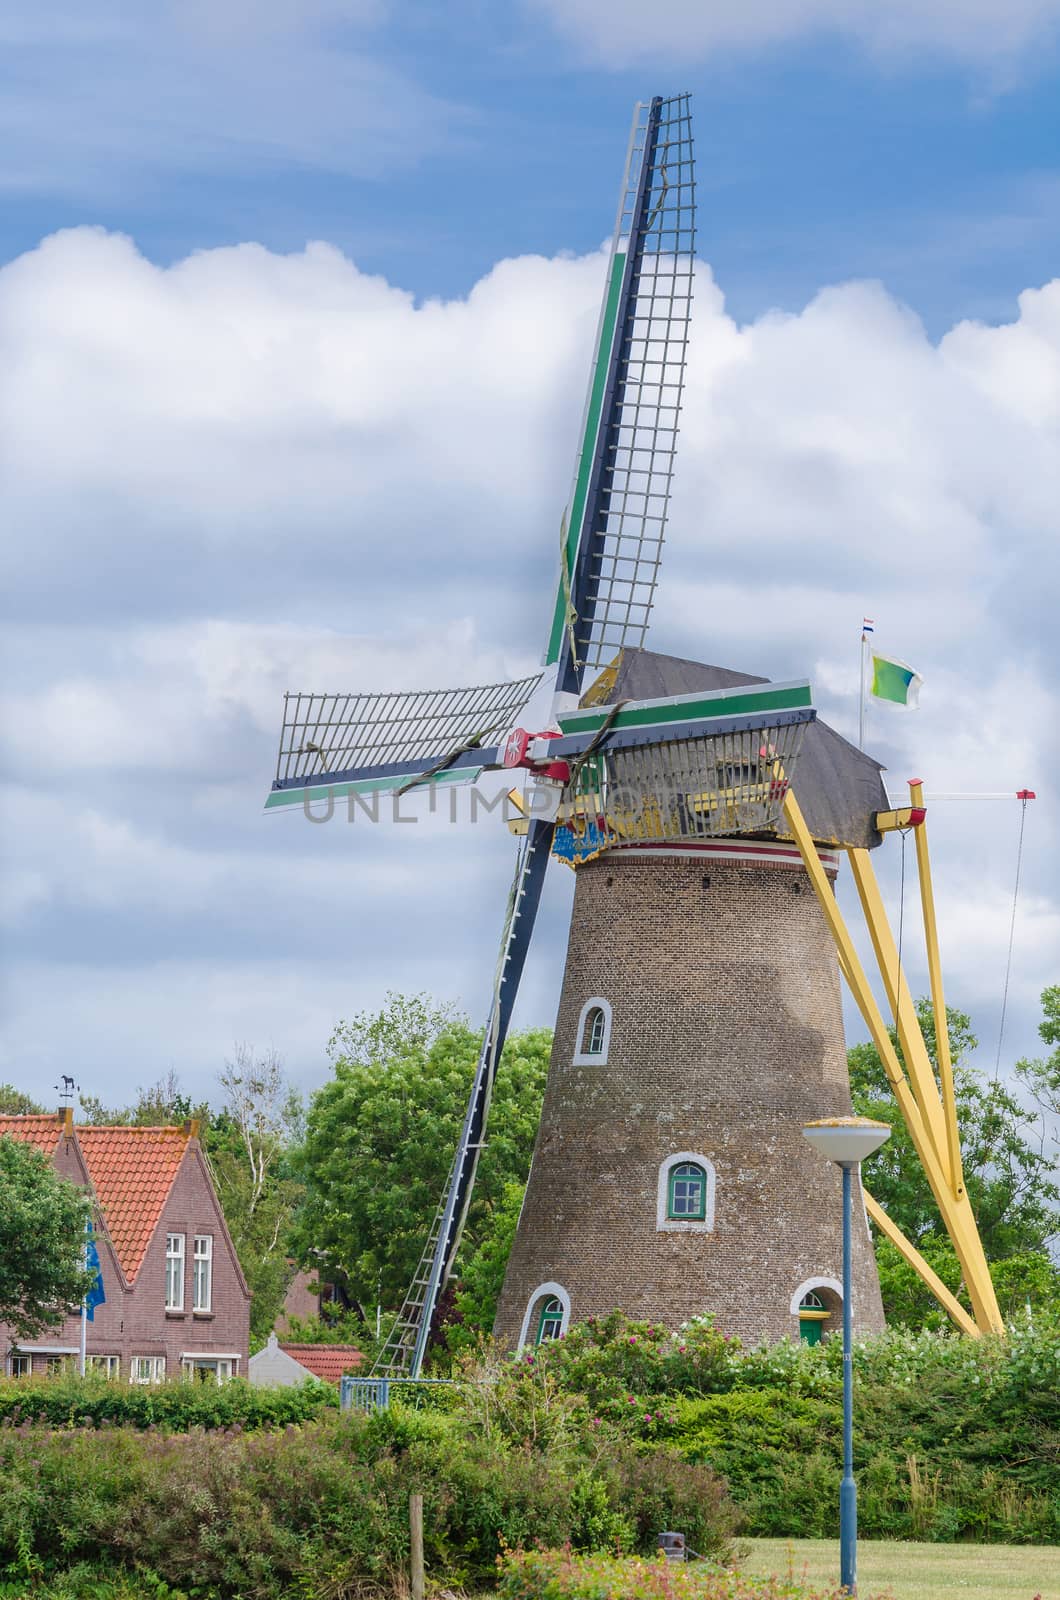 Historic old windmill in the province of Zeeland, Netherlands against blue sky.